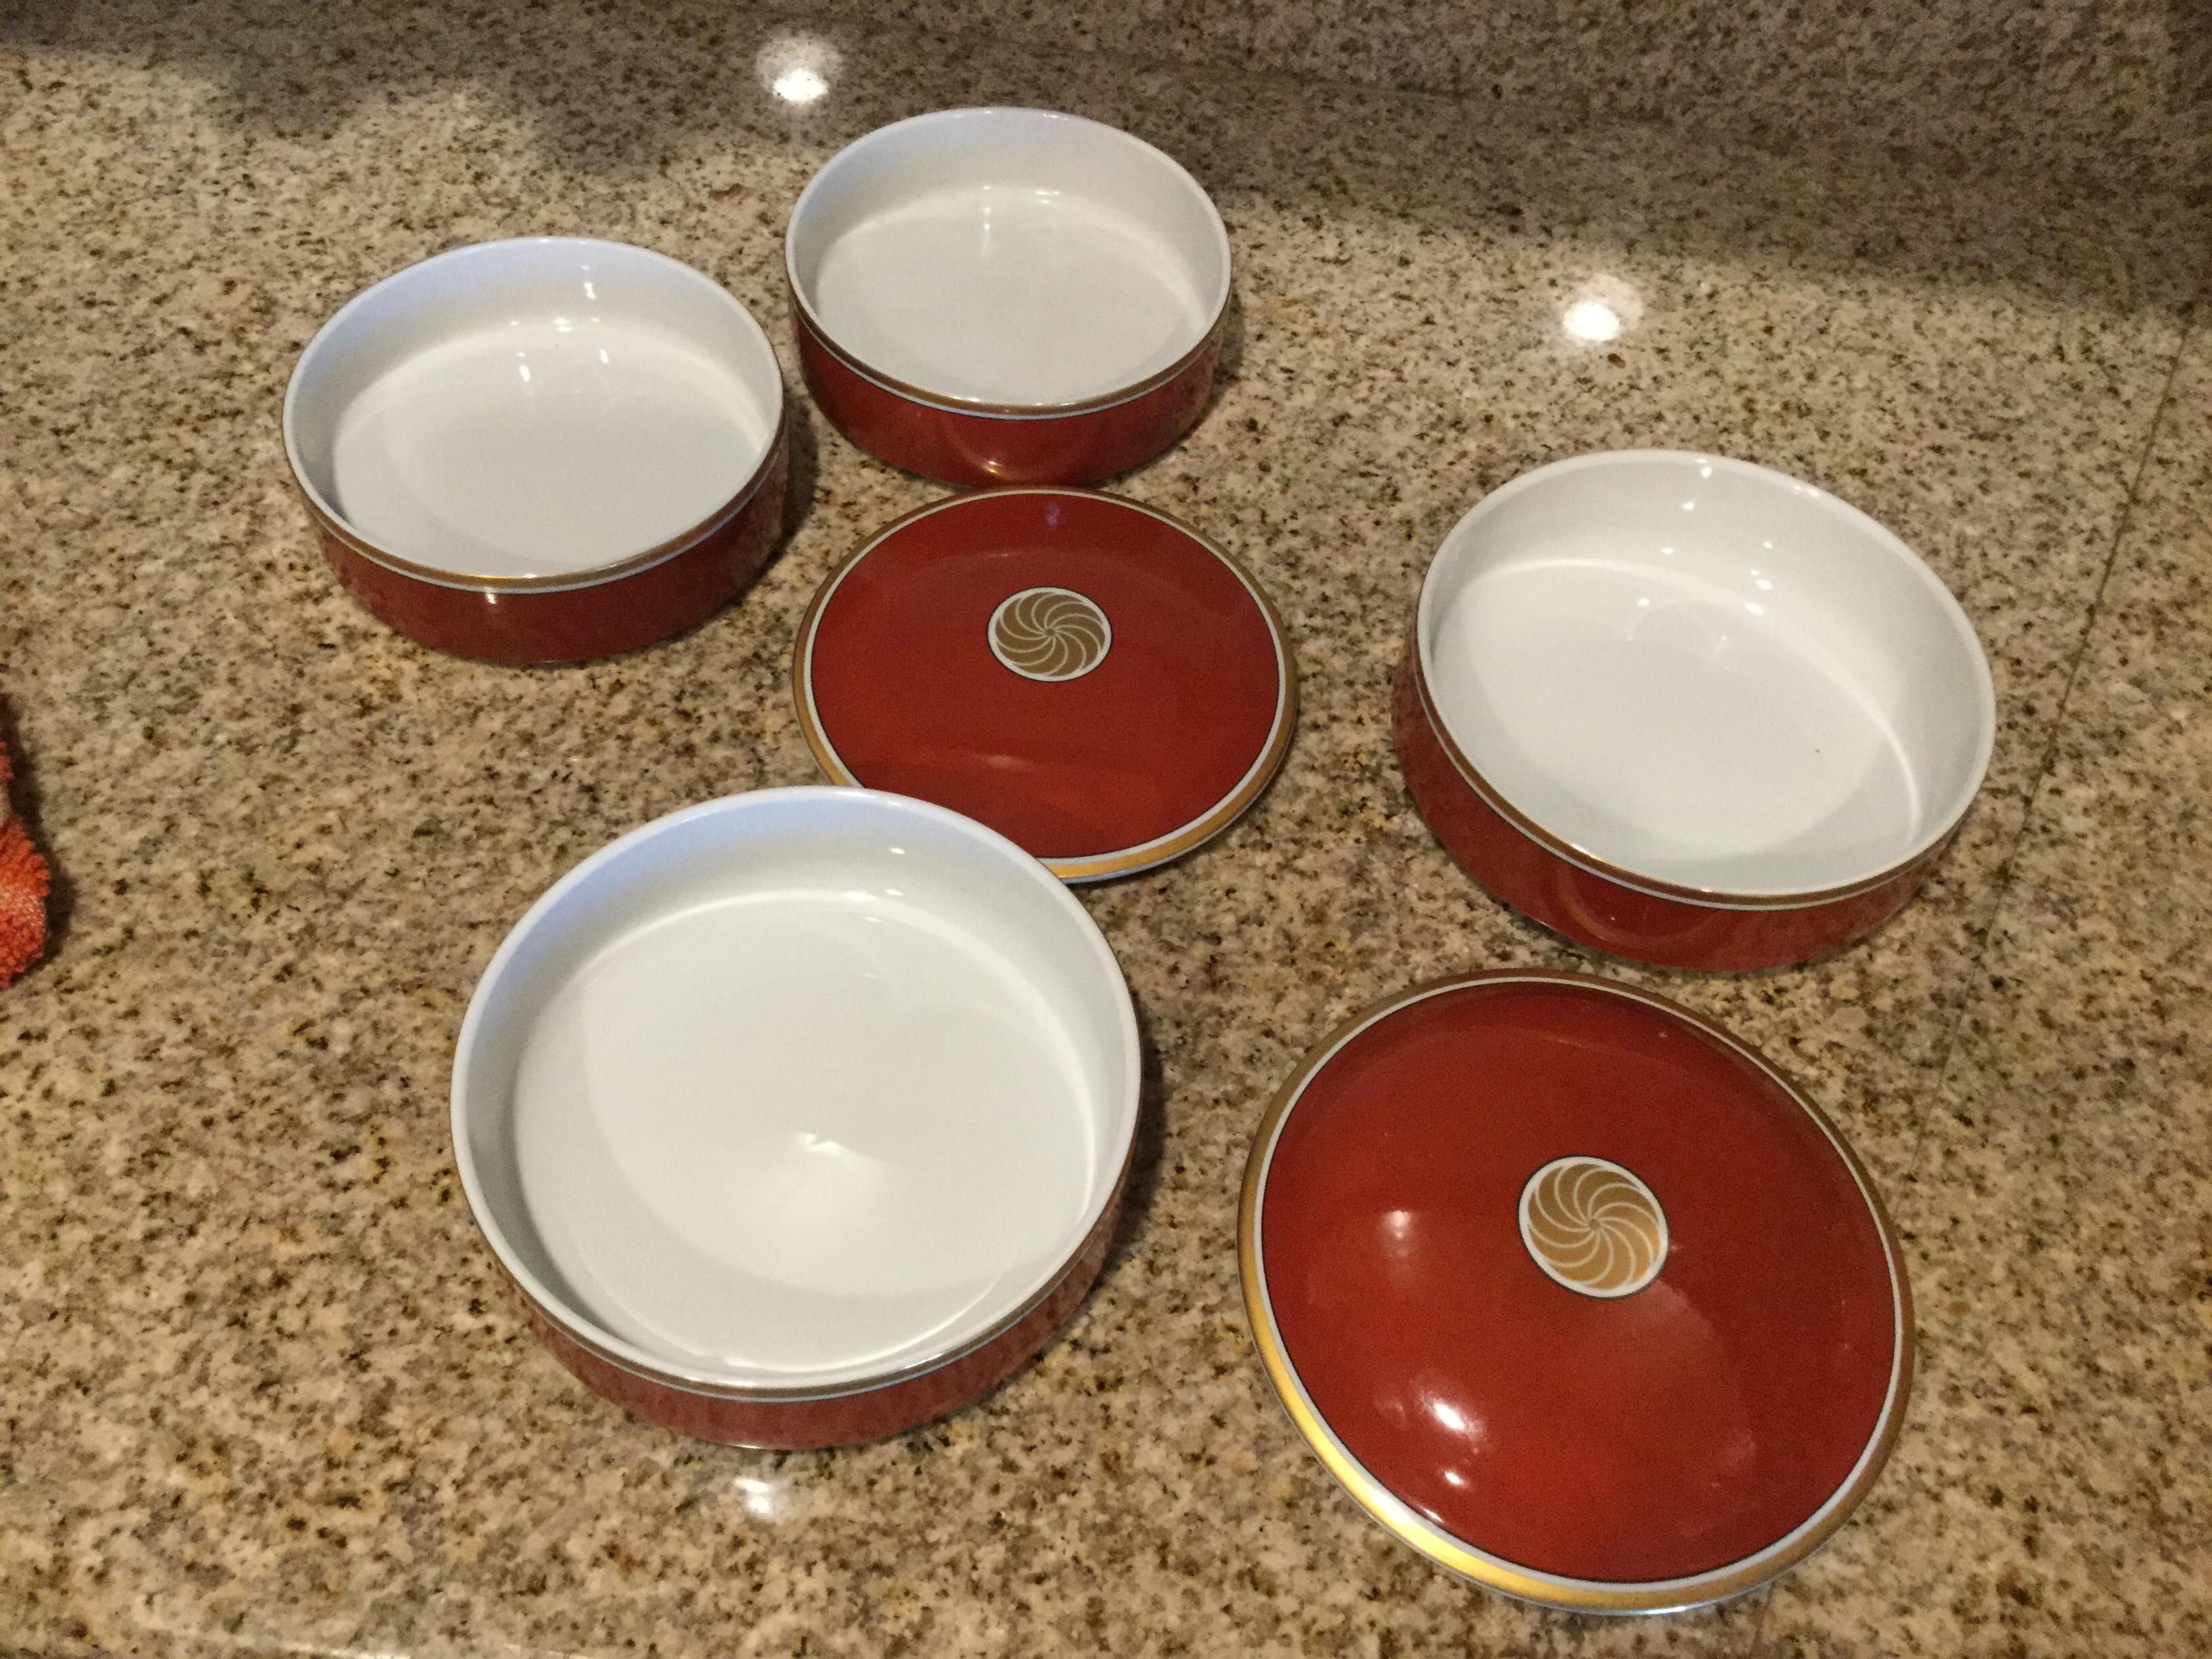 Pair of double stack serving bowls with lids. Perfect for vegetables! They appear never to have been used. This is part of a huge set recently acquired from a multi million dollar Palm Springs estate. Purchased in 1979 this Medallion d’Or pattern is